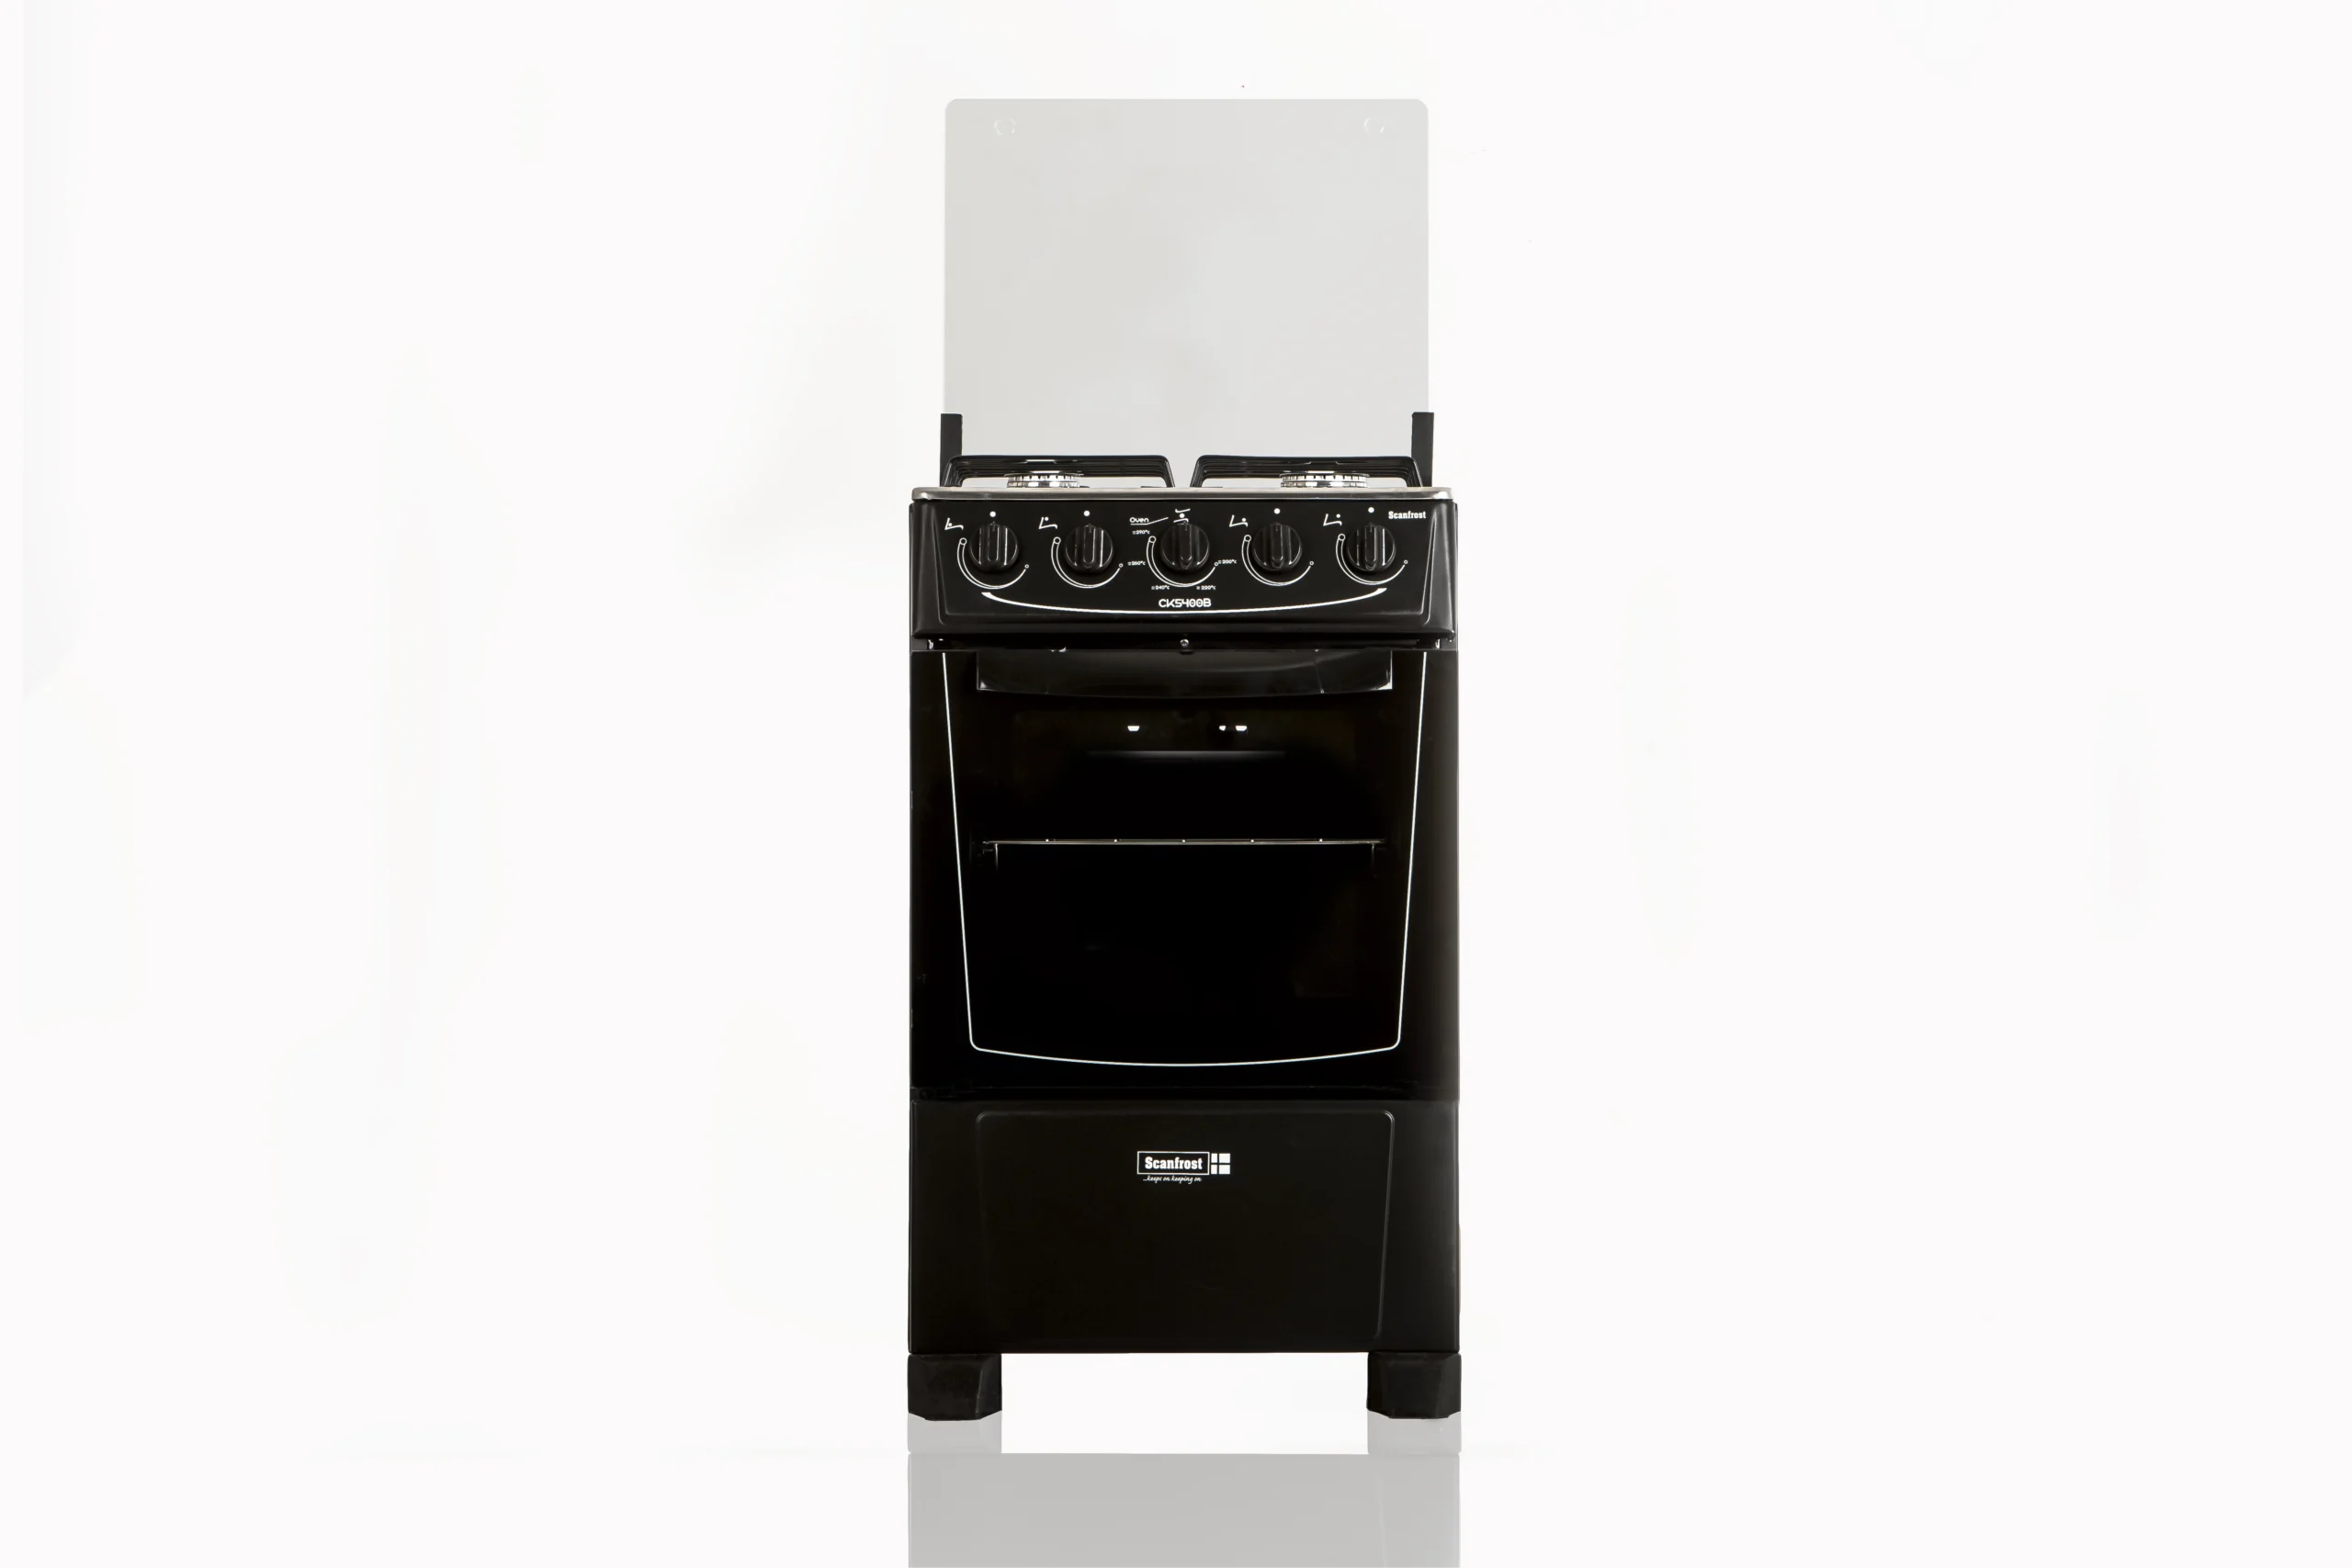 SCANFROST GAS COOKER 4 BURNERS CK5400B BLACK